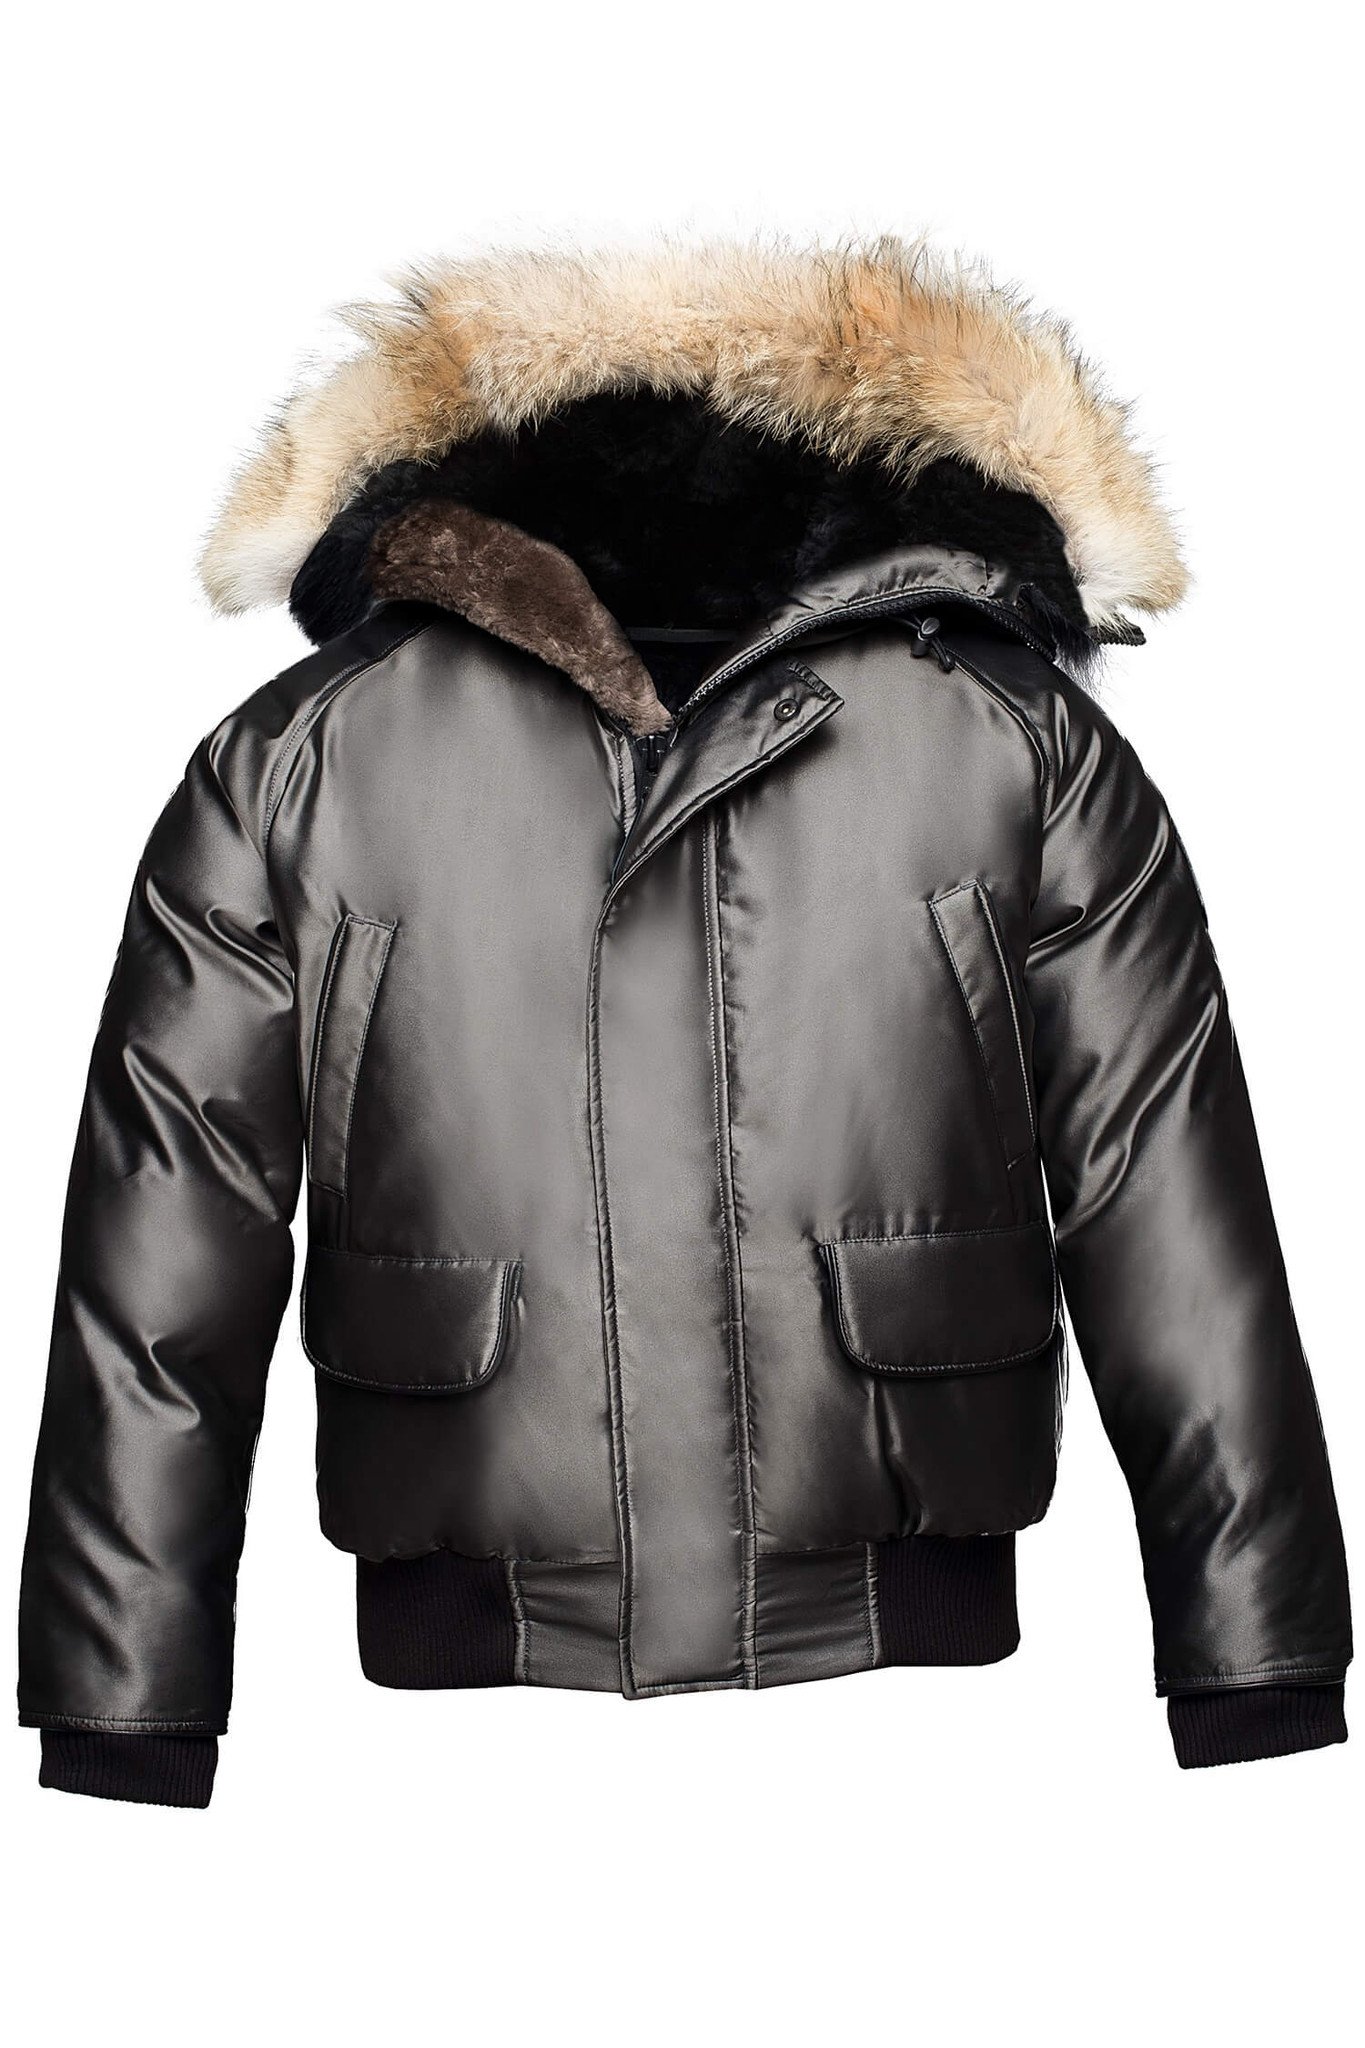 Inuvik Limited Edition Bomber Jacket- Arctic Bay